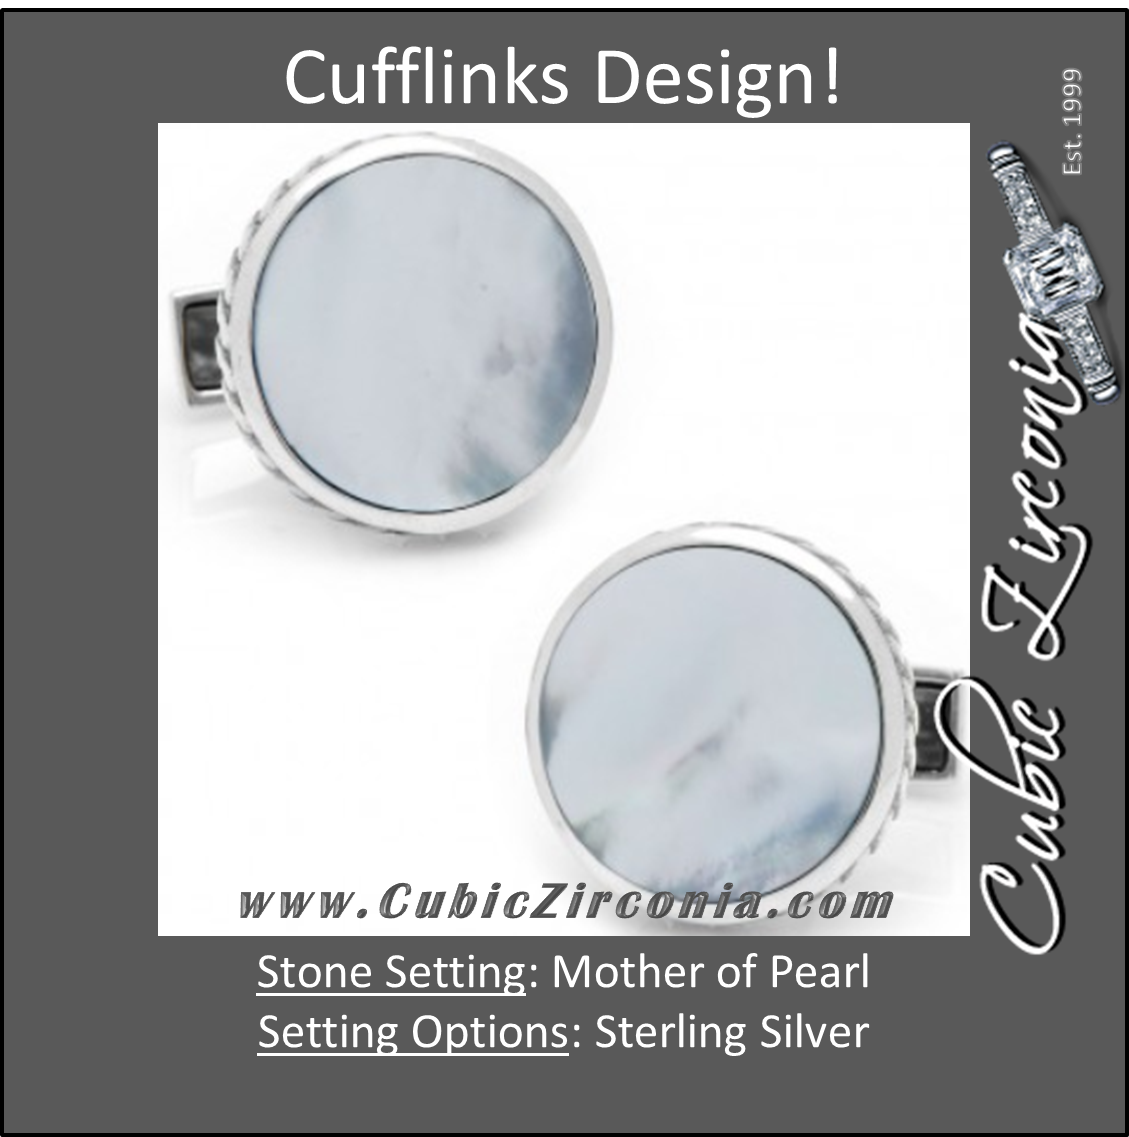 Men’s Cufflinks- Sterling Silver Round Scaled with Blue Mother of Pearl